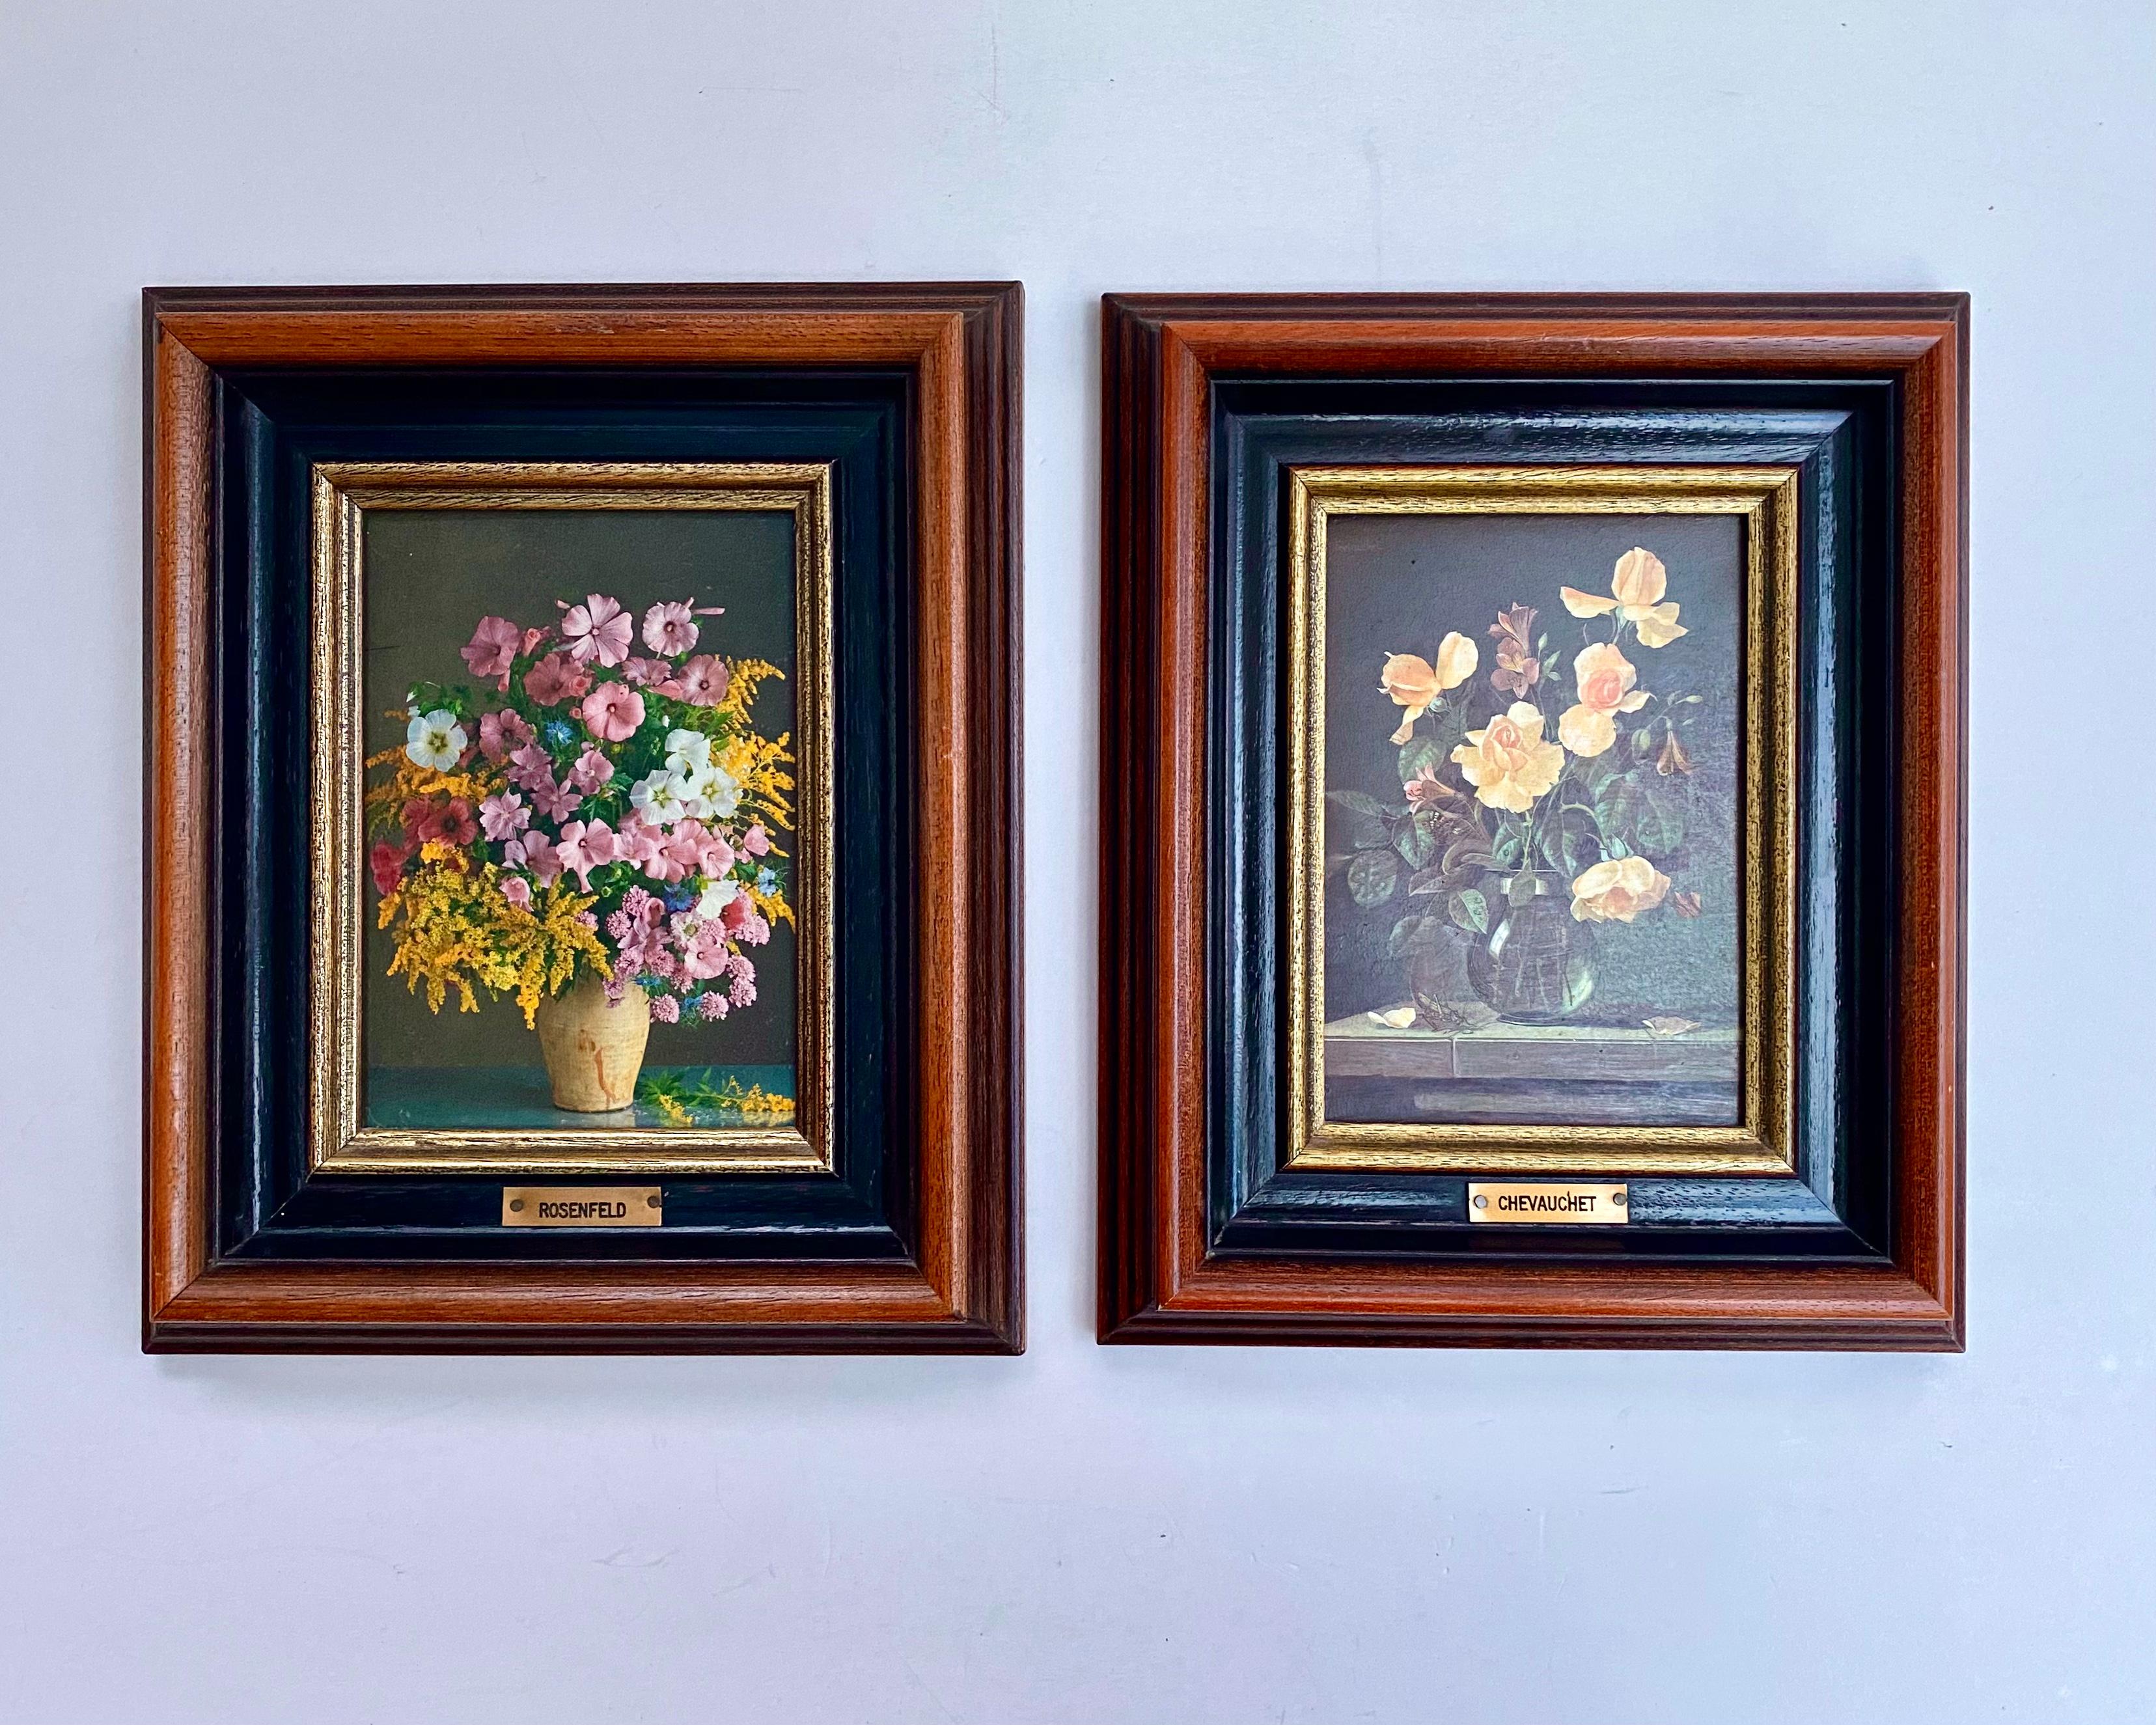 Vintage Wildflowers Paintings Still Life Art On Canvas Framed Flower Boho Chic Wall Art Decor Floral Painting. 

The colors are vibrant.

The subject classic red roses, buds, leaves and tulips all in a pleasing vintage gold and brown frames which